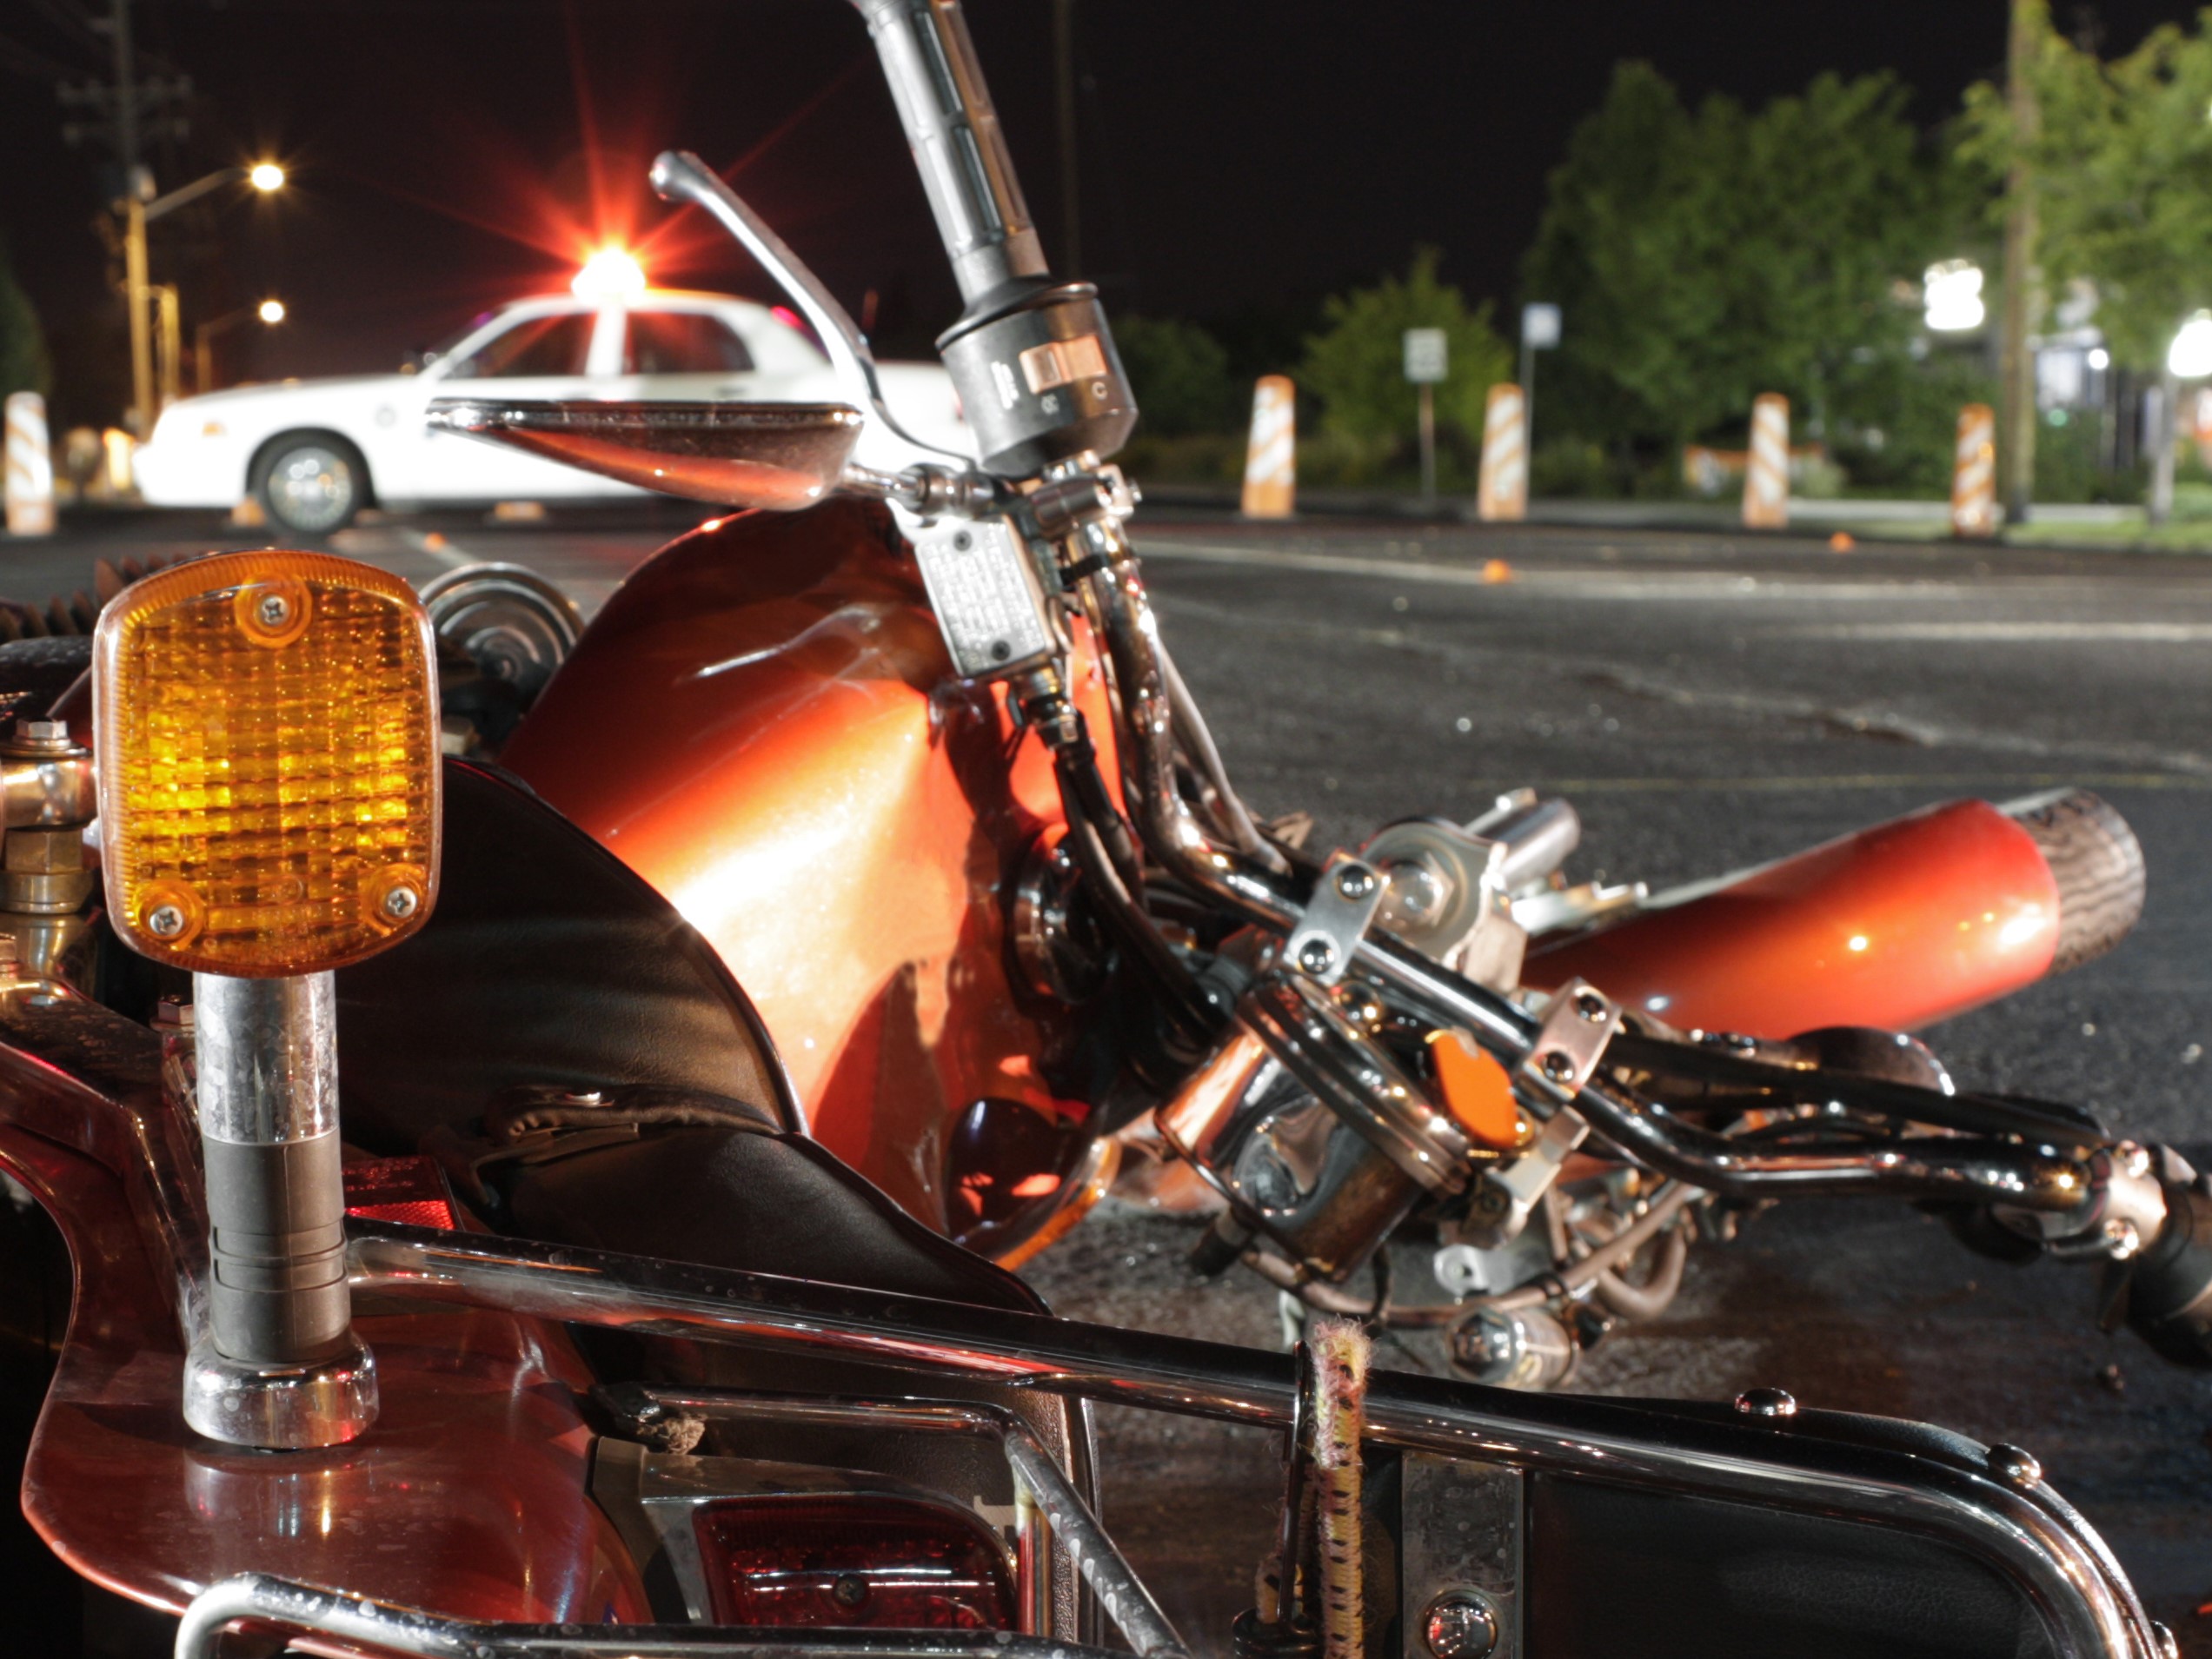 10 Causes of Motorcycle Accidents